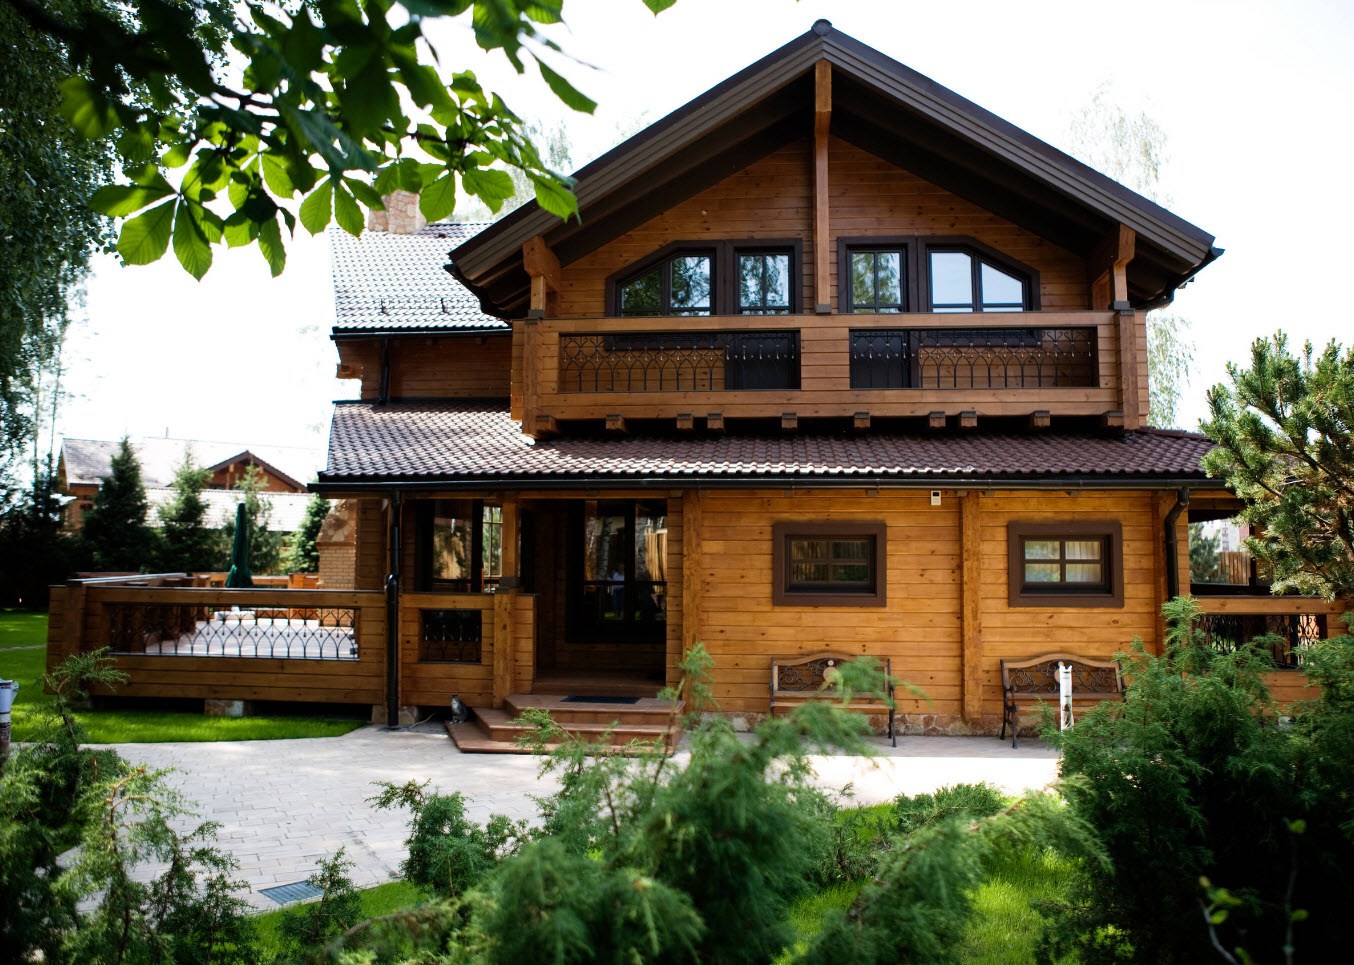 Timber Cladding House Facades of Different Styles and Materials. Classic designed Eco styled cottage in the village with large balcony